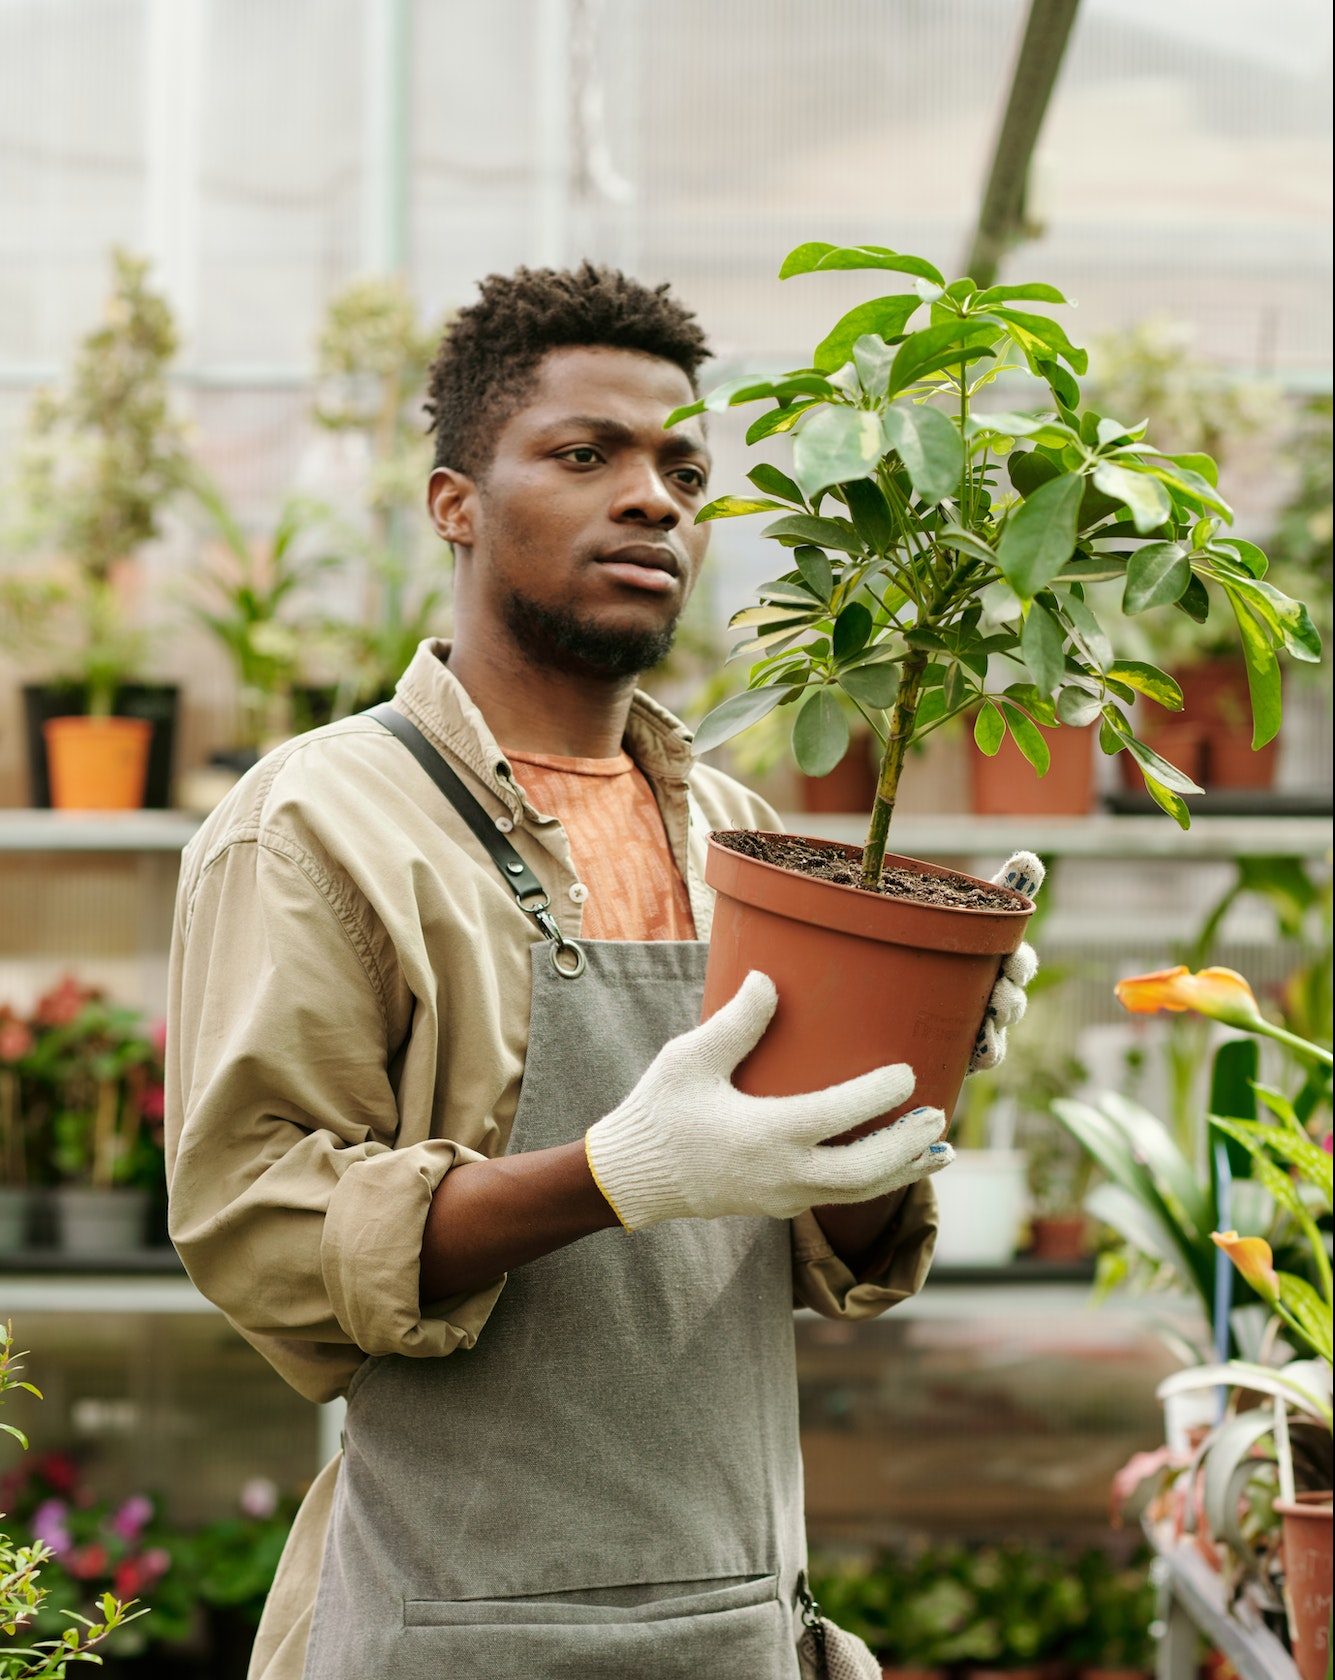 Gardener examining potted plant in shop